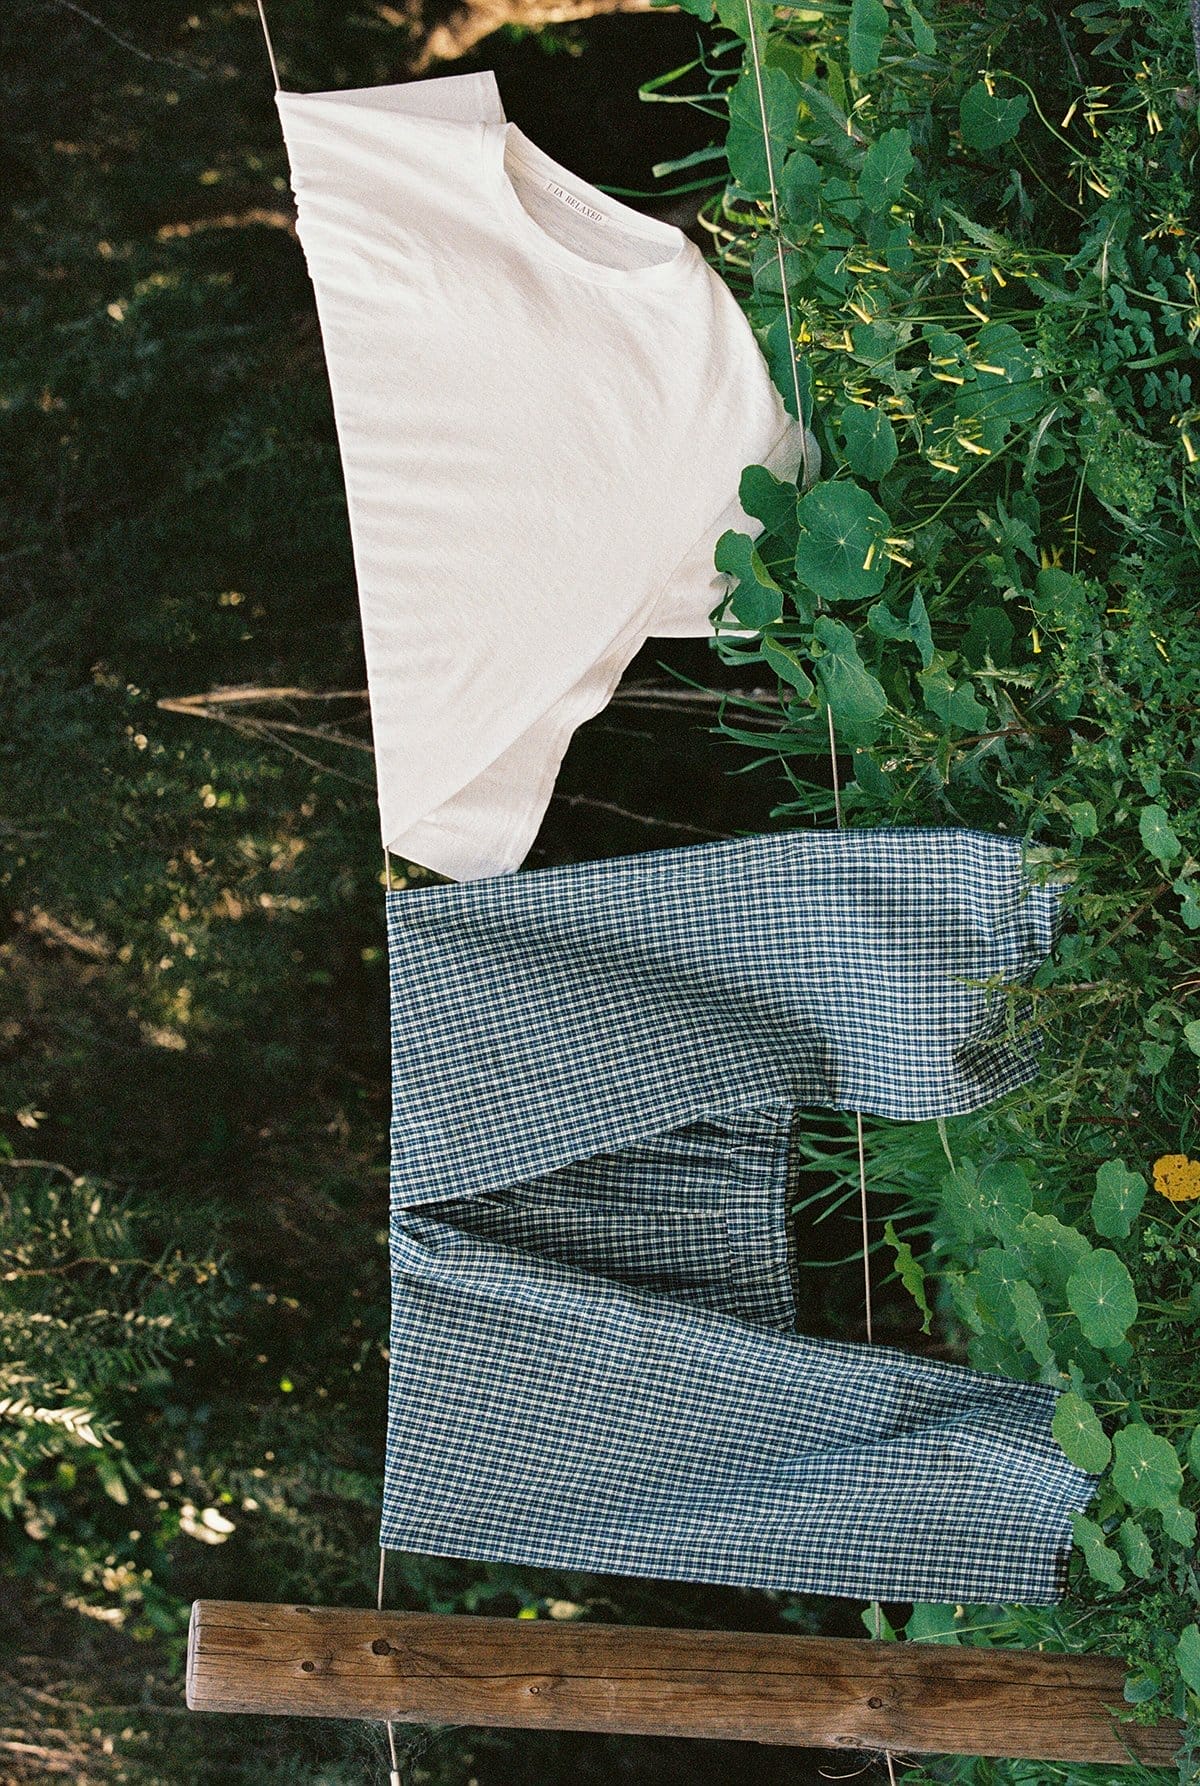 rotated image of plaid pants and a white tee hanging on a clothesline in the forest.